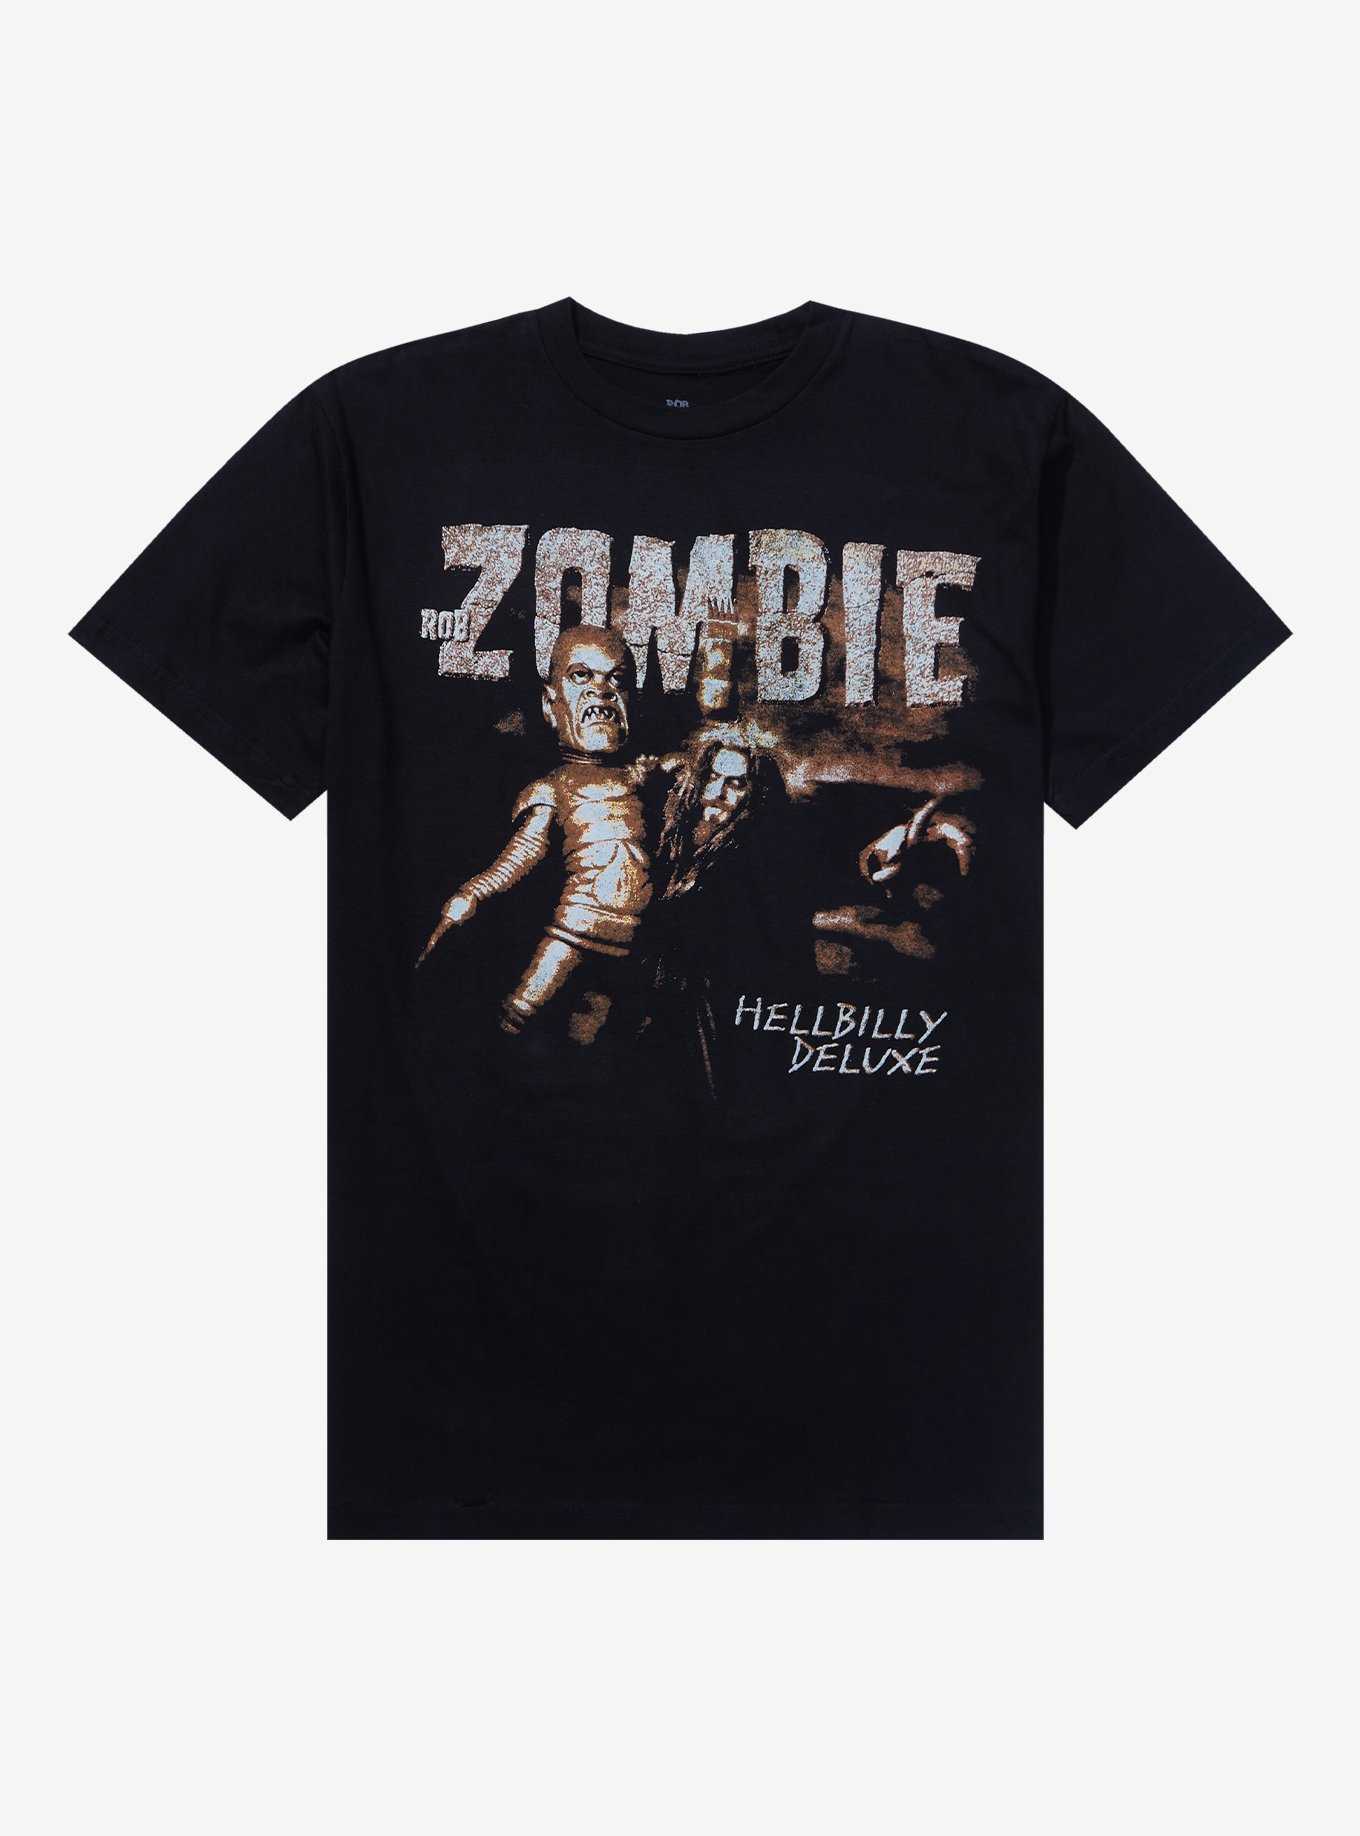 Rob Zombie Hellbilly Deluxe Tour T-Shirt, , hi-res